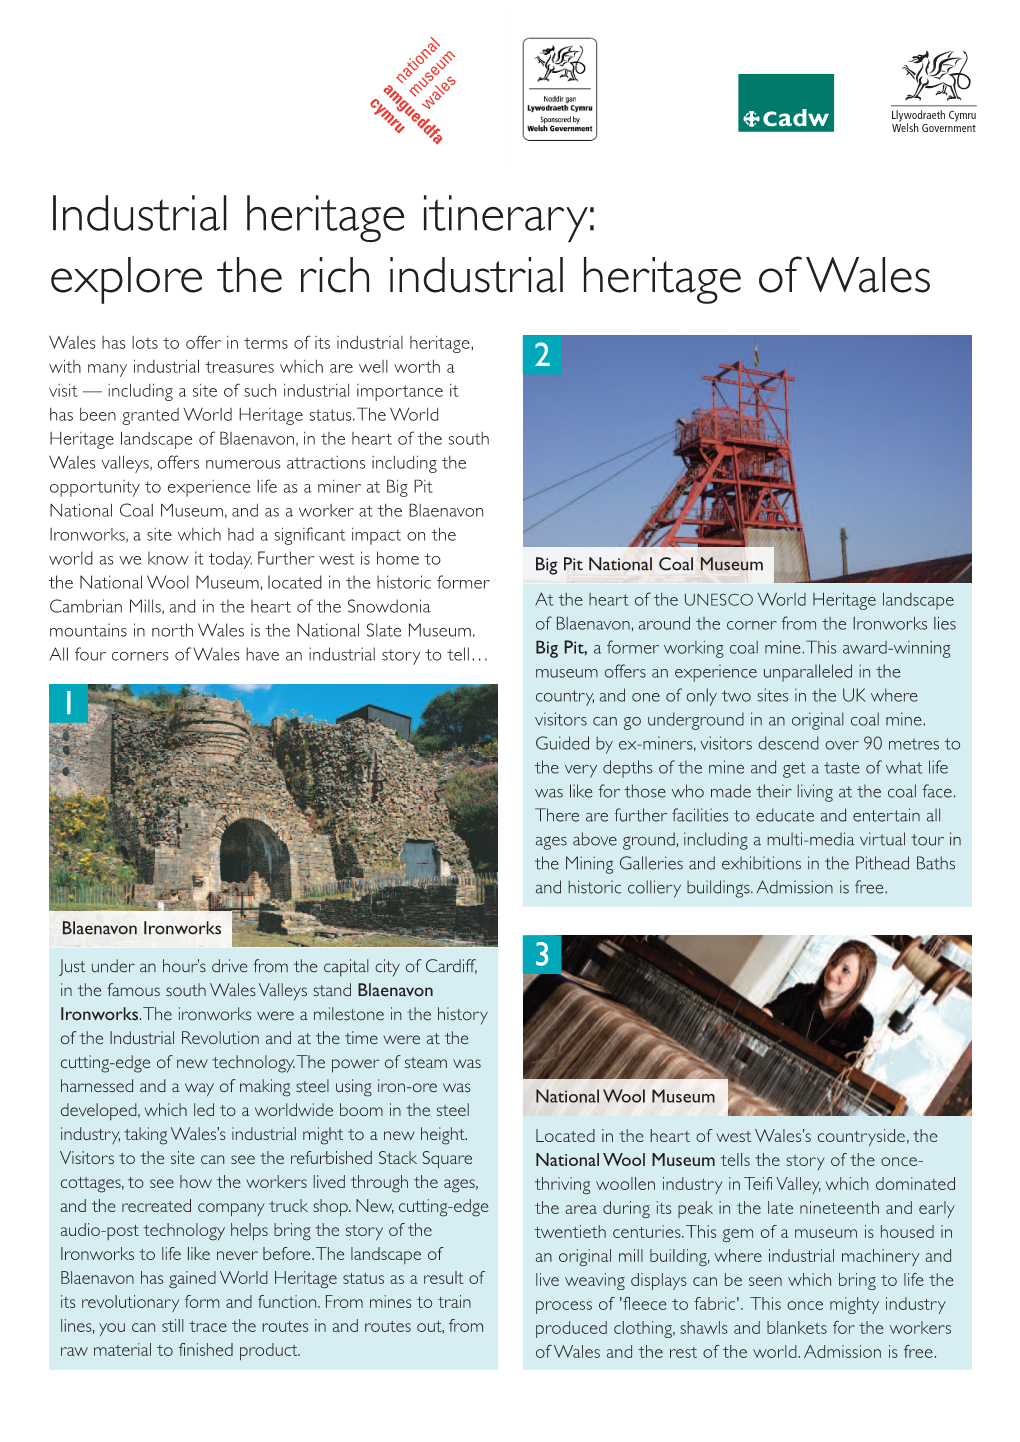 Industrial Heritage Itinerary: Explore the Rich Industrial Heritage of Wales